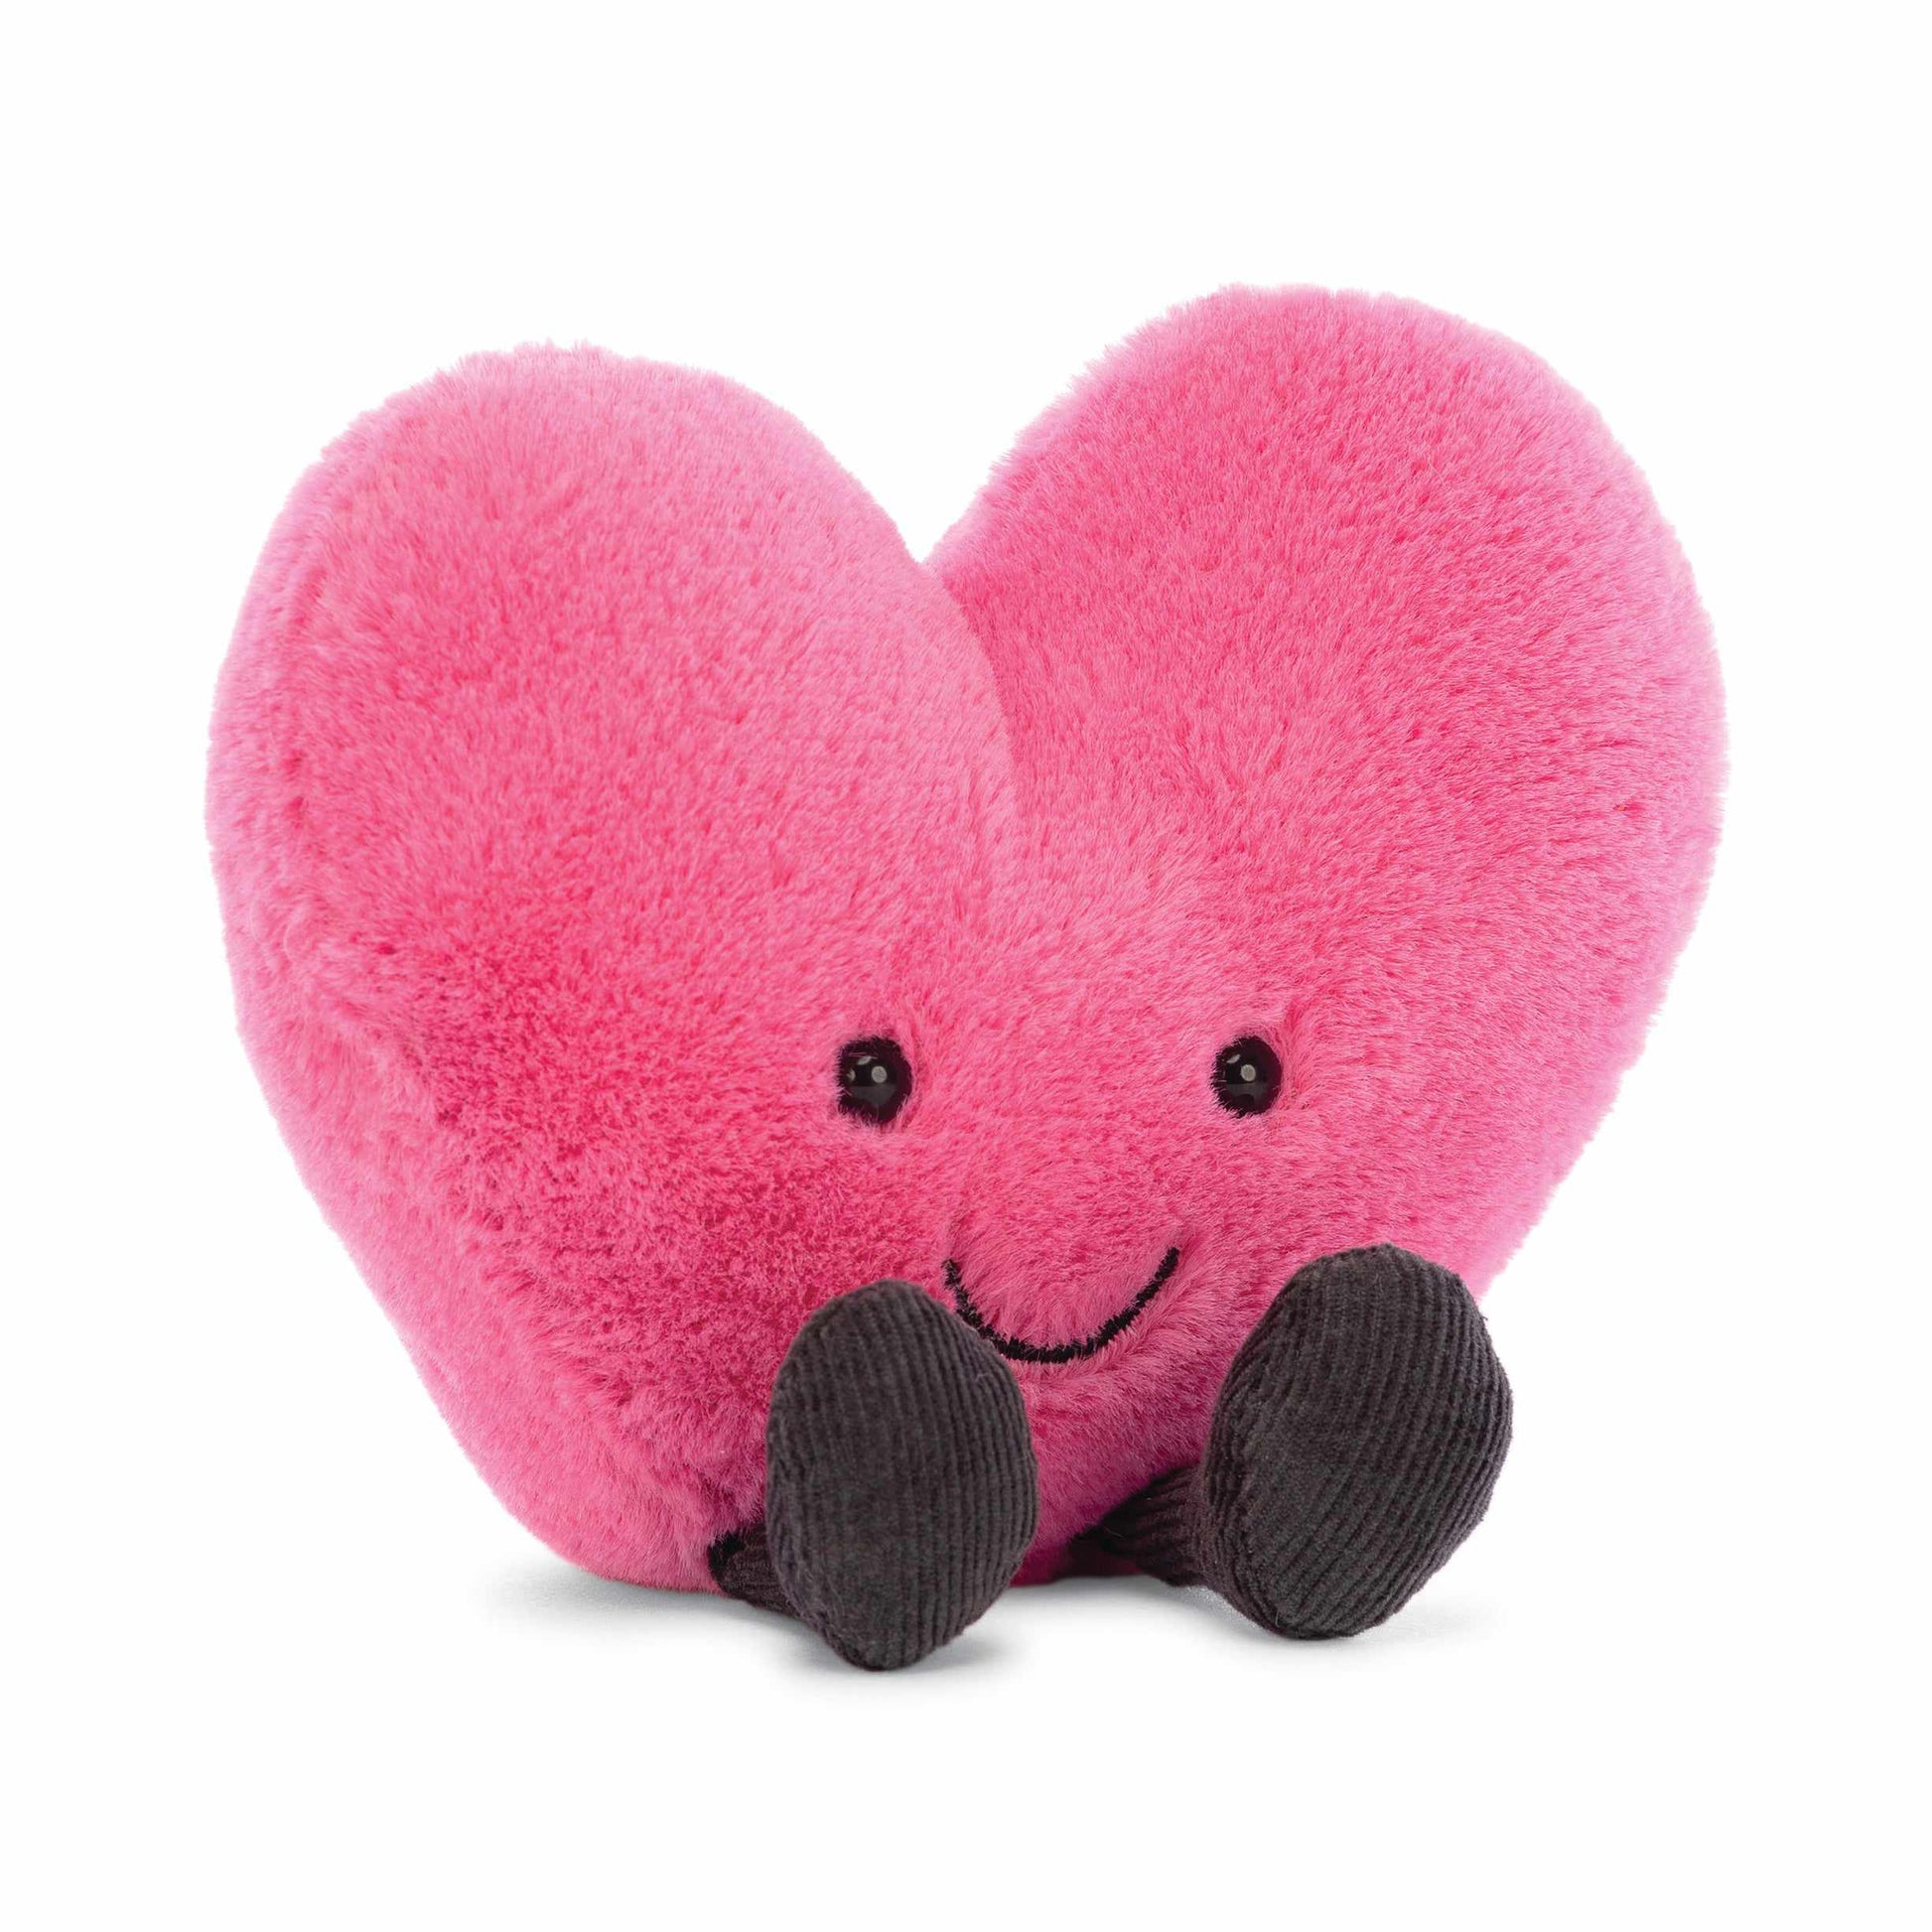 JellyCat Amuseable Hot Pink Heart